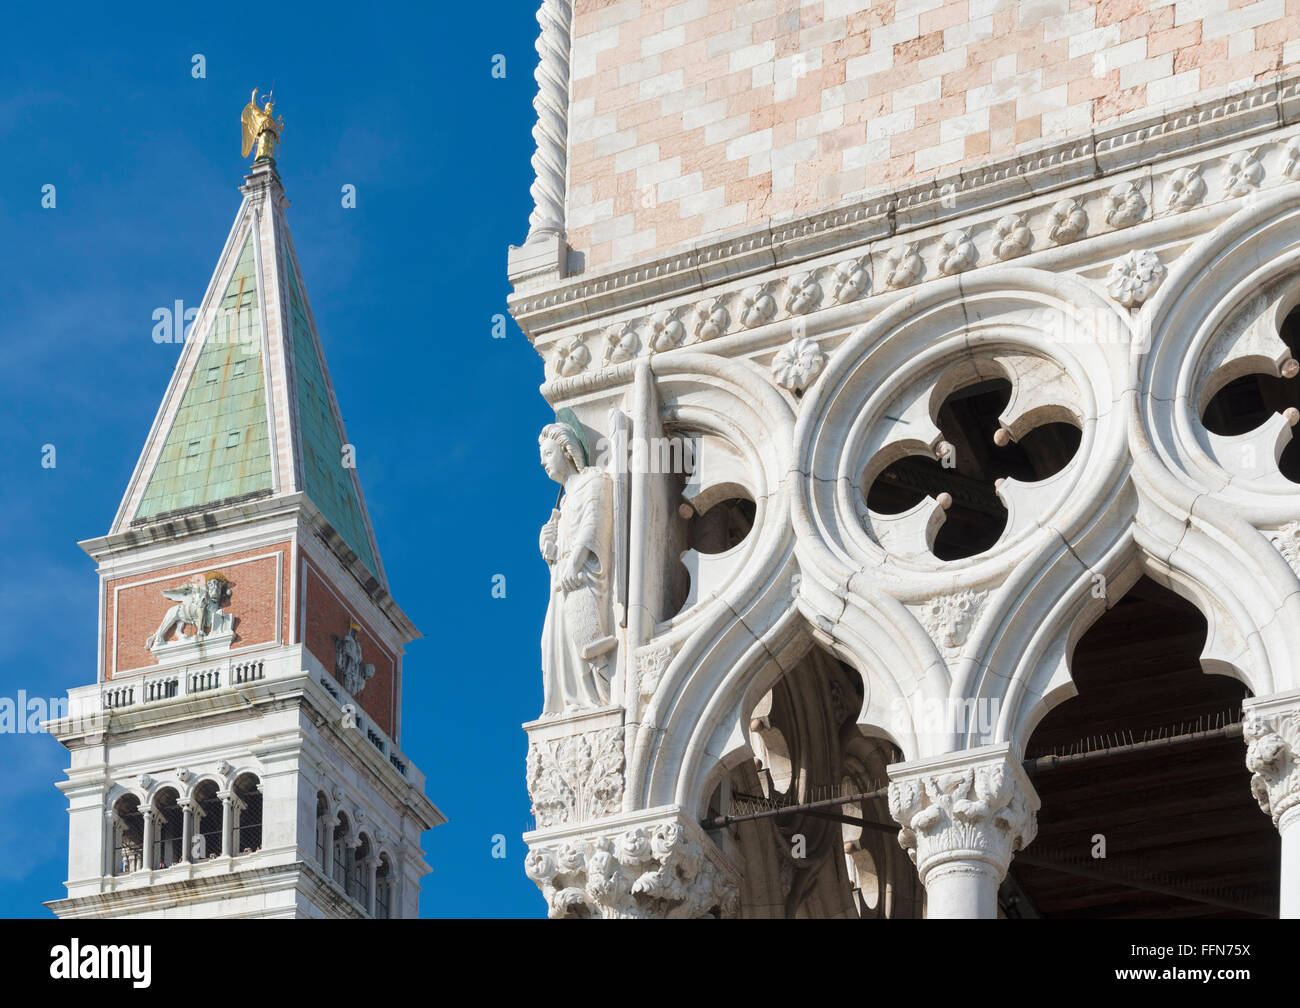 San Marco Campanile Bell Tower of St Mark’s Church with the Palazzo Ducale or Doge’s Palace in Venice, Italy Stock Photo